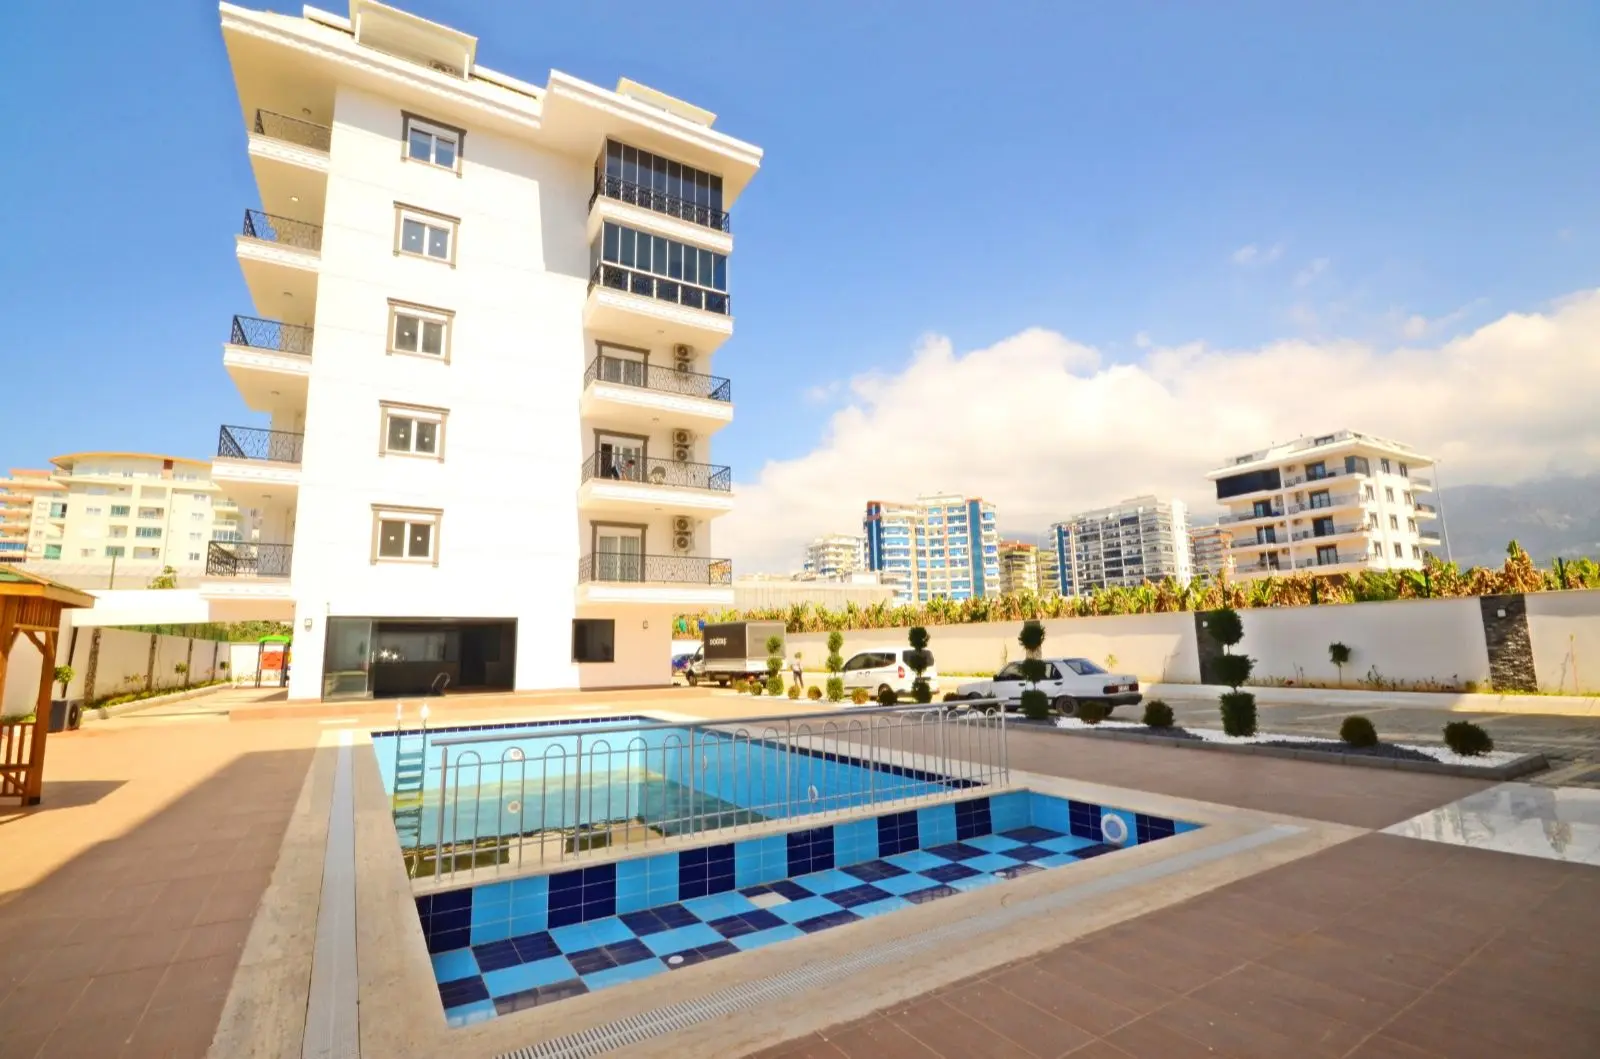 LUXURIOUS 3+1 DUPLEX IN KARGICAK, ONLY 250 M TO THE SEA